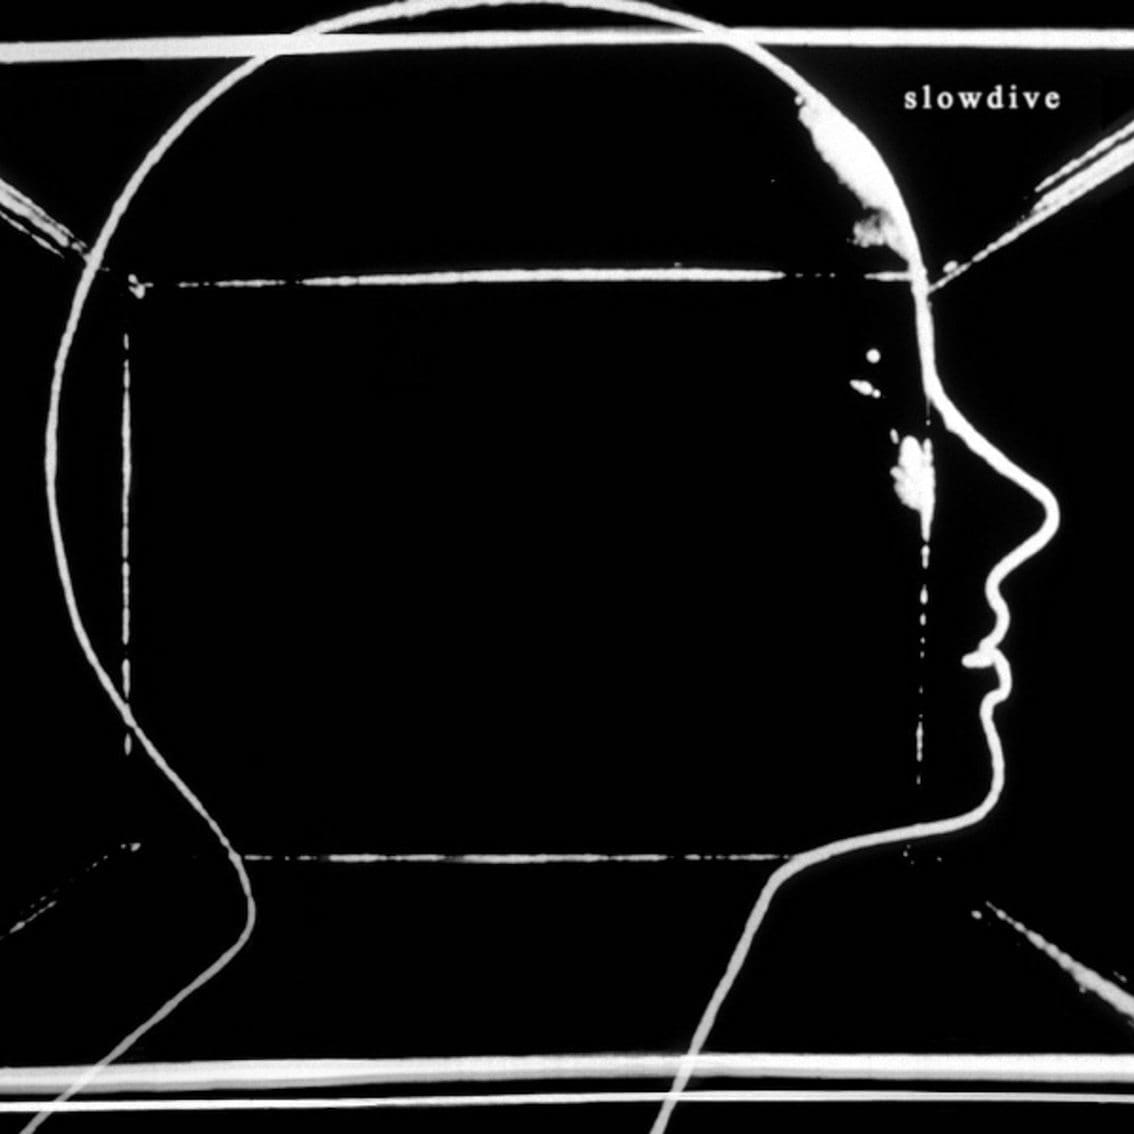 More details available from selftitled Slowdive album preorders